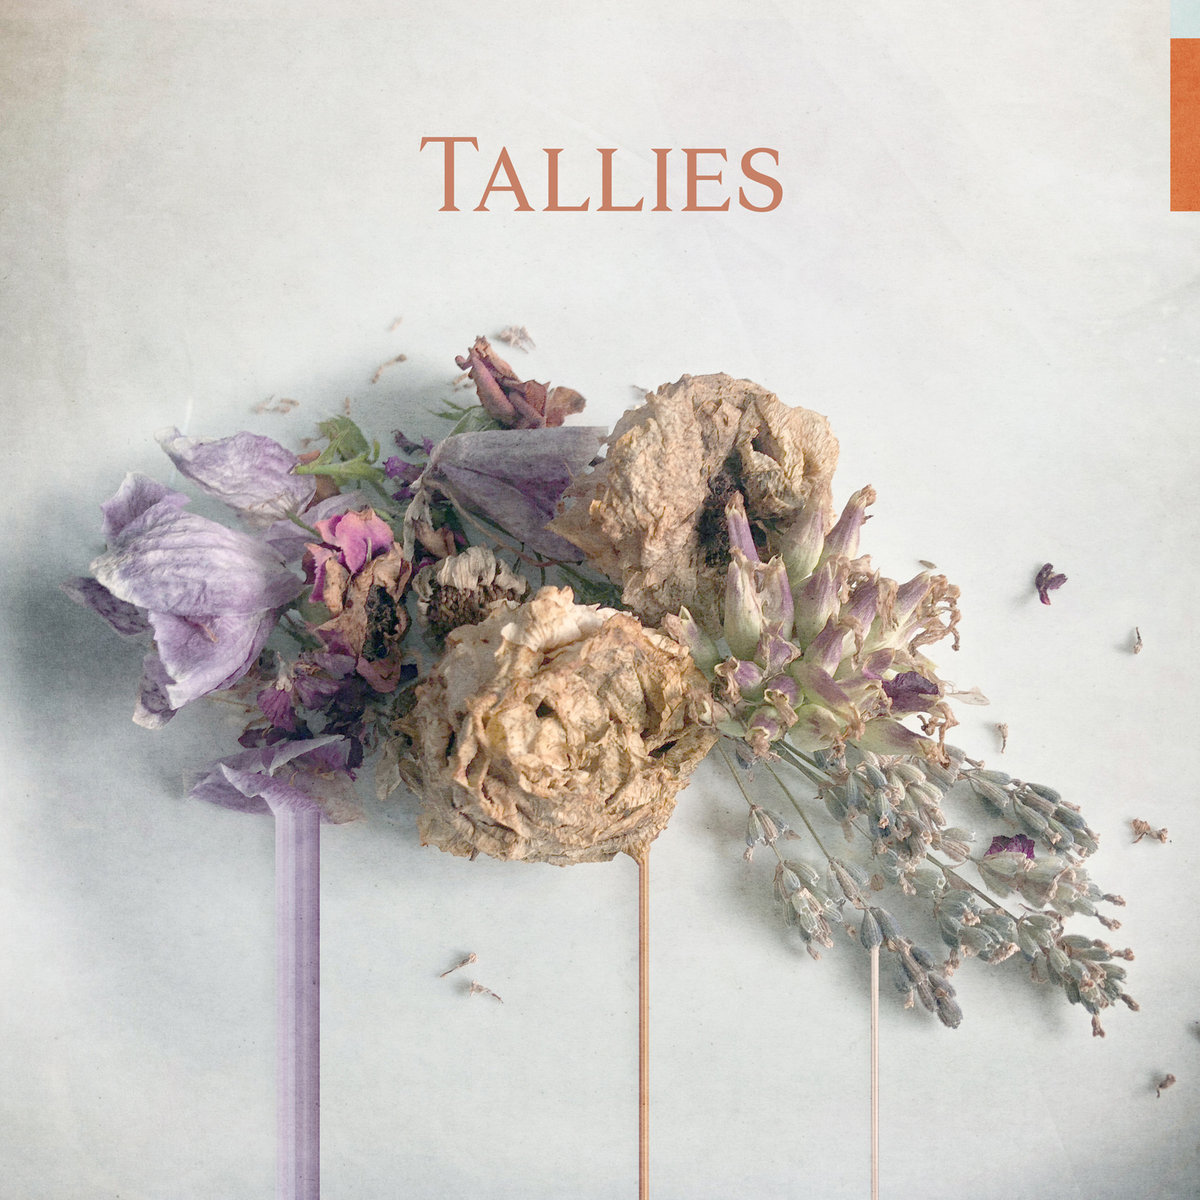 Tallies - Tallies (Fear of Missing Out)